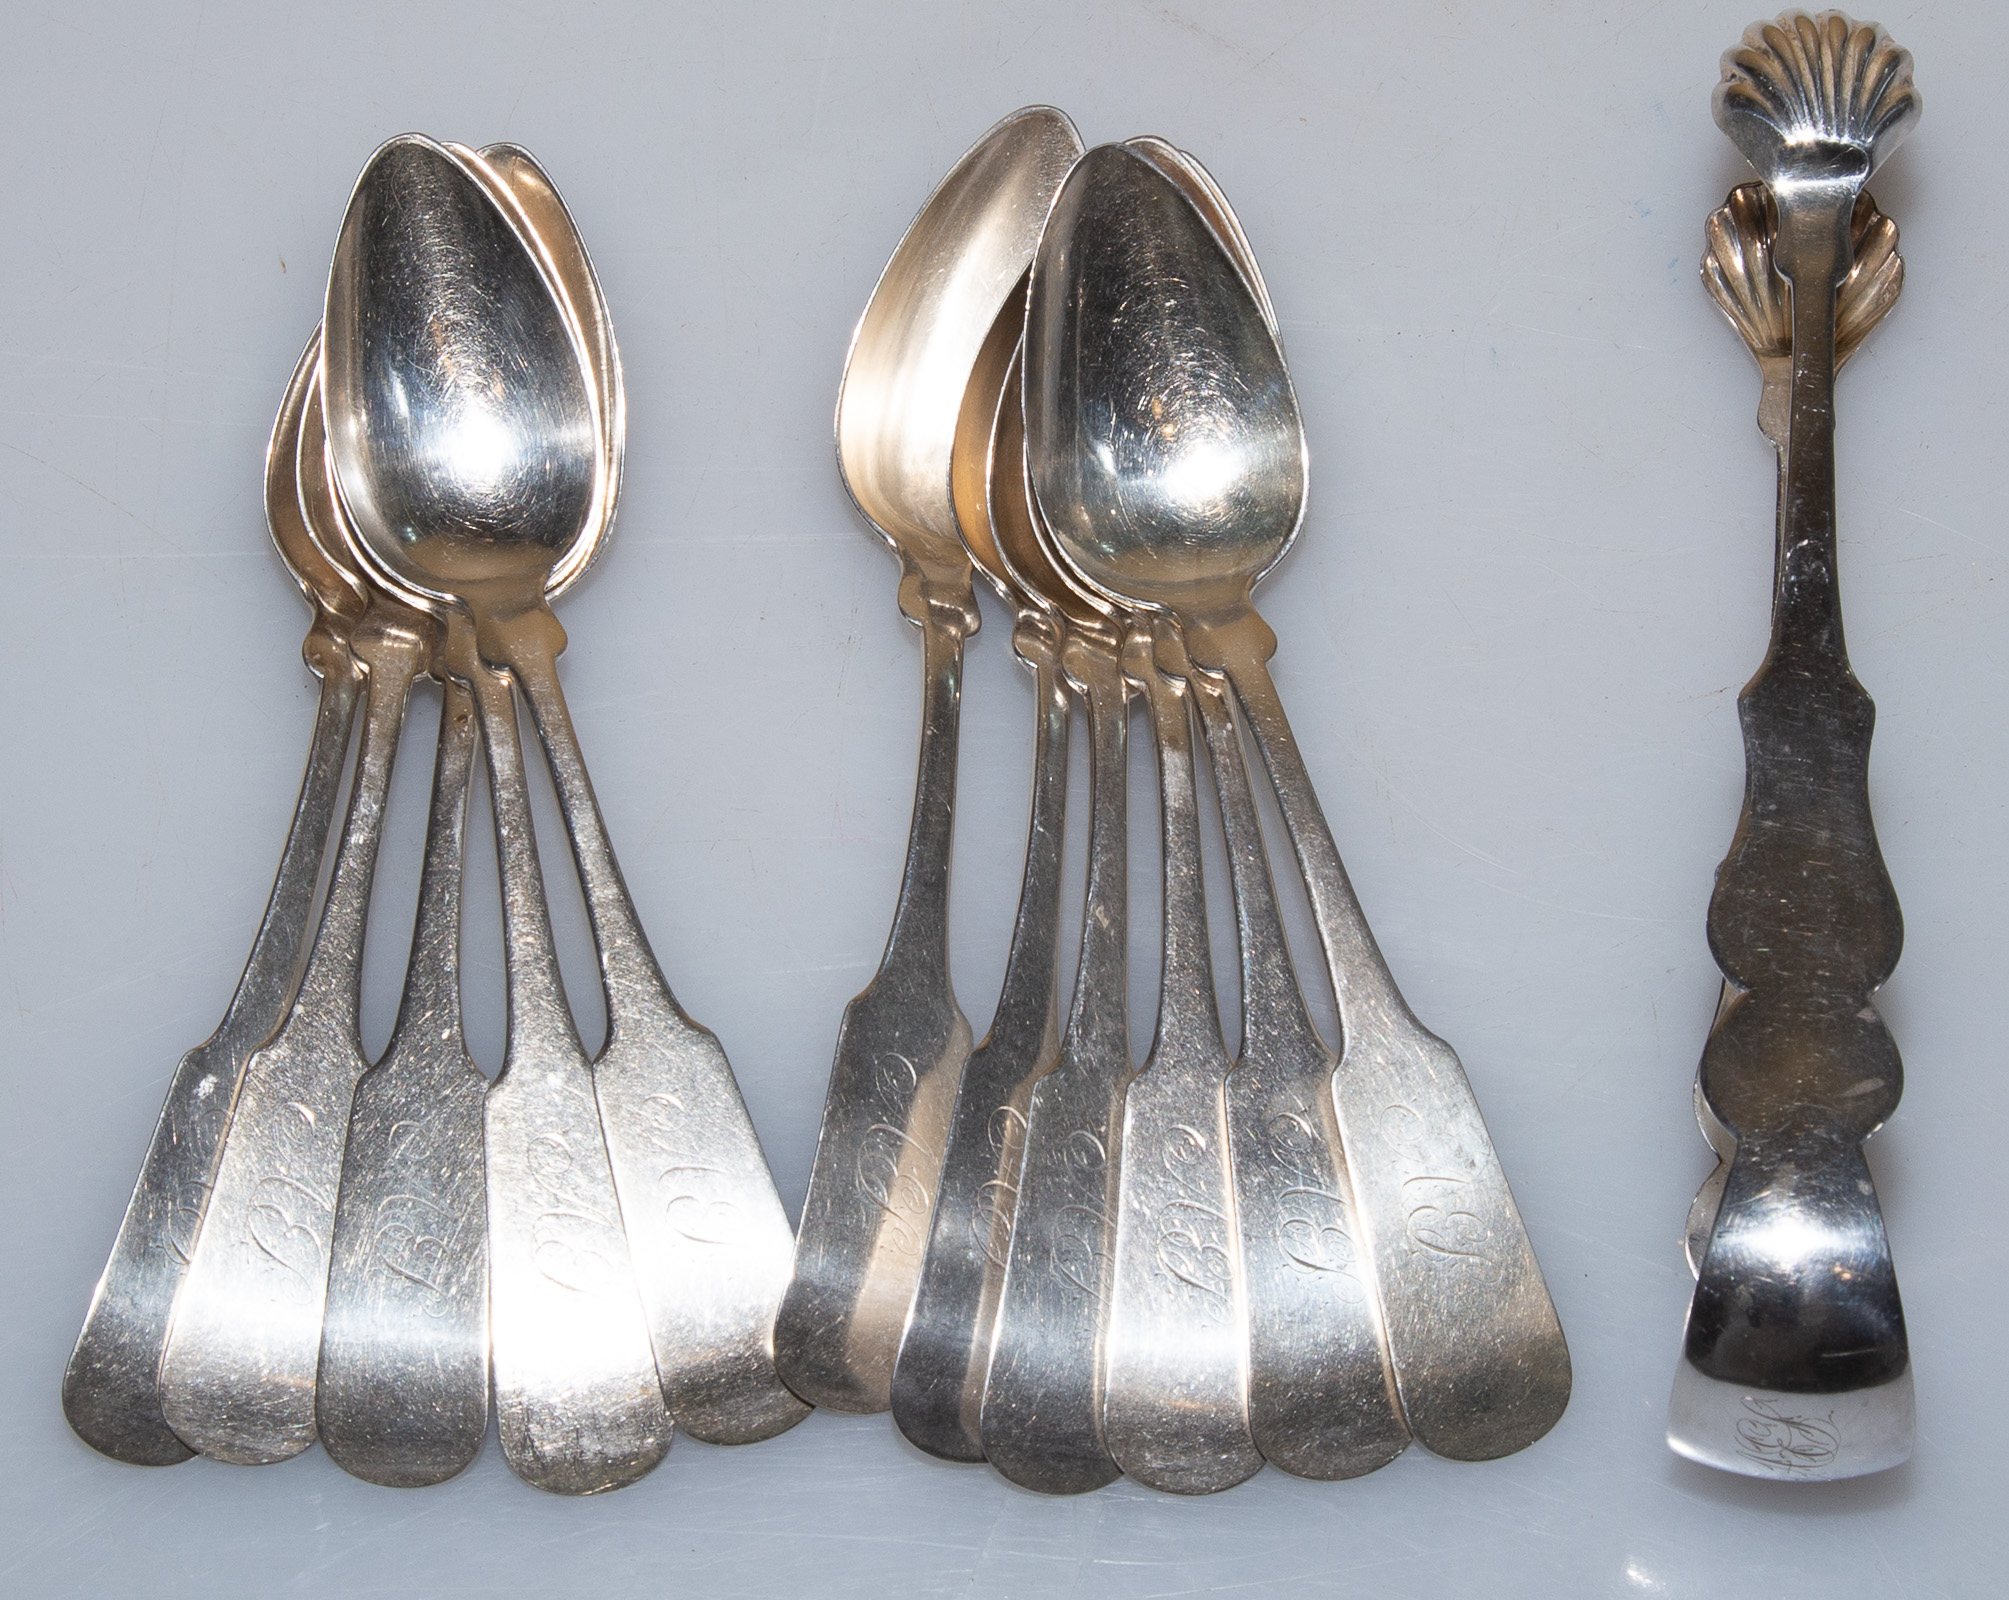 EARLY NEW ENGLAND COIN SILVER FLATWARE 335618